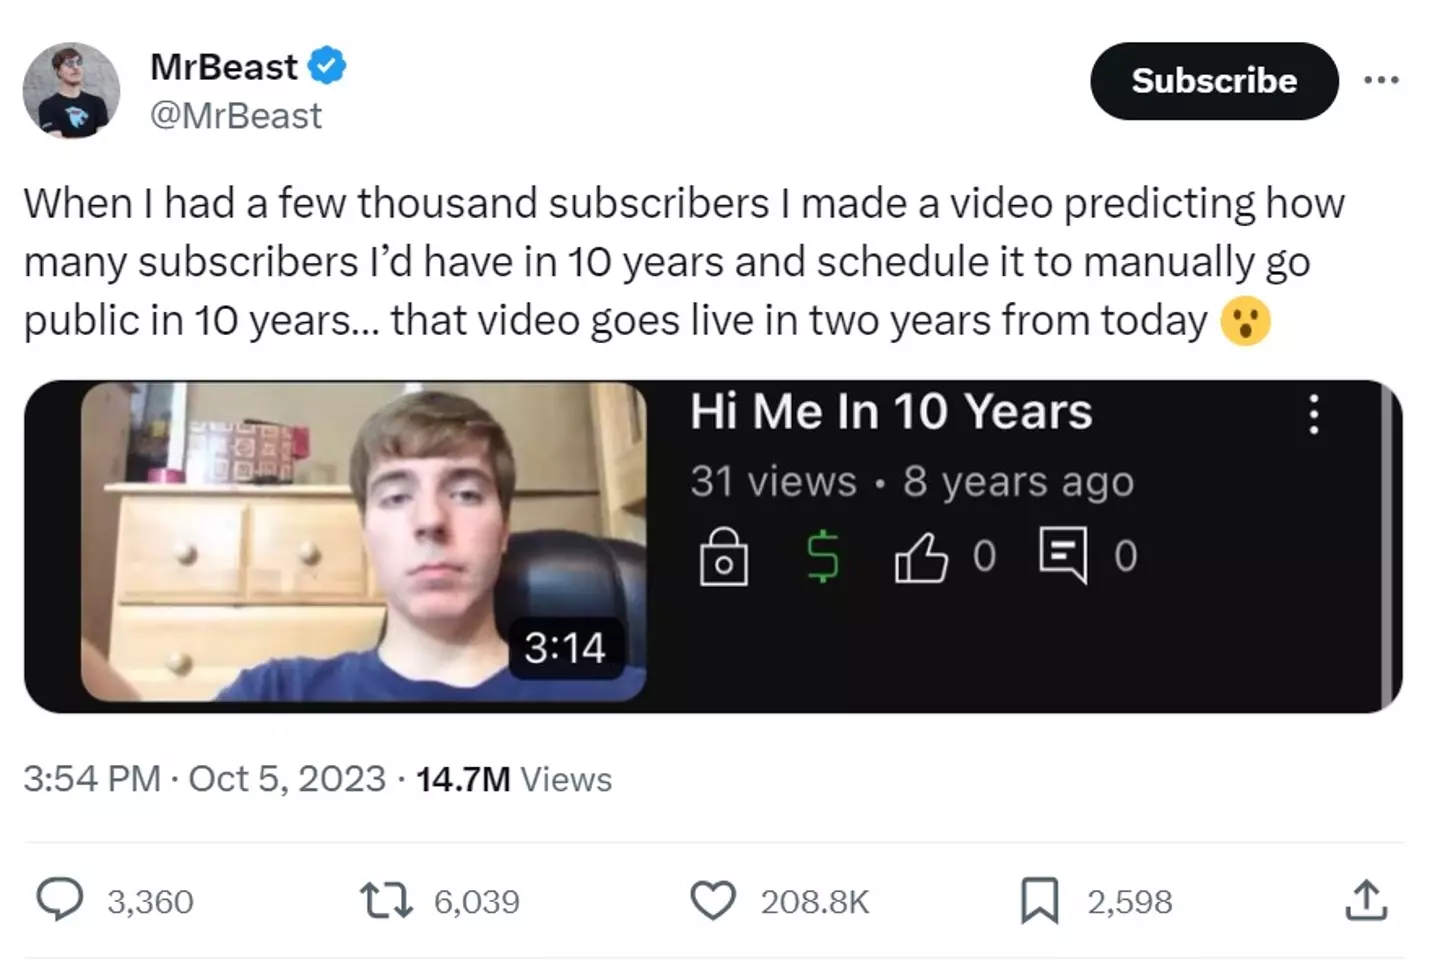 MrBeast has an old video he made years ago waiting to be released.